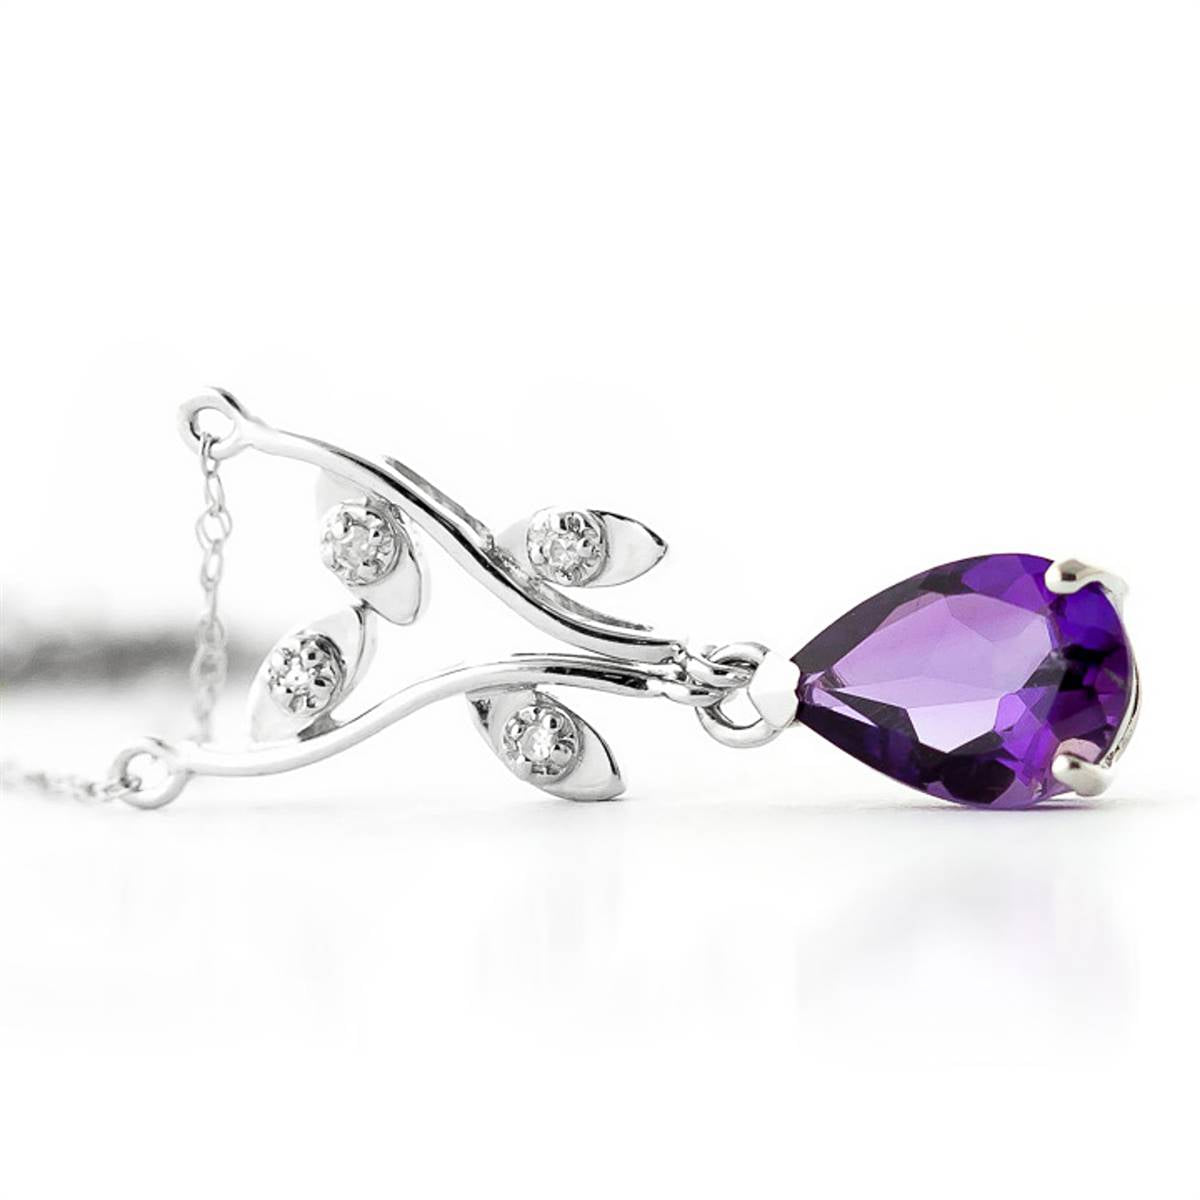 1.52 Carat 14K Solid White Gold She Holds Me Amethyst Diamond Necklace